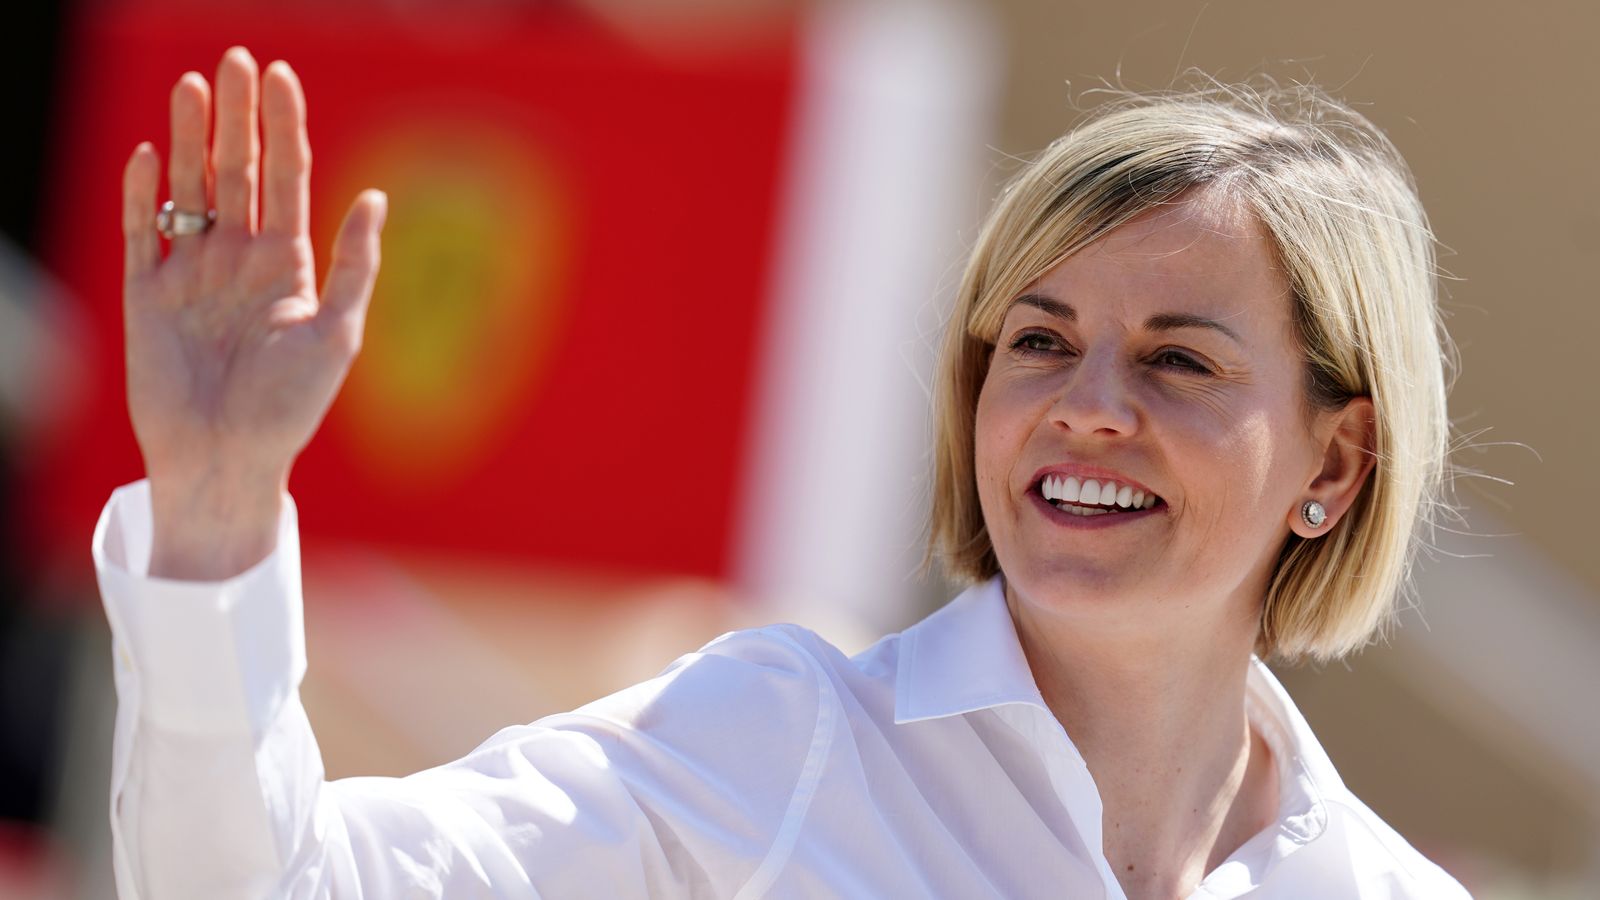 Susie Wolff, wife of Mercedes boss Toto, launches legal action against Formula 1 governing body FIA